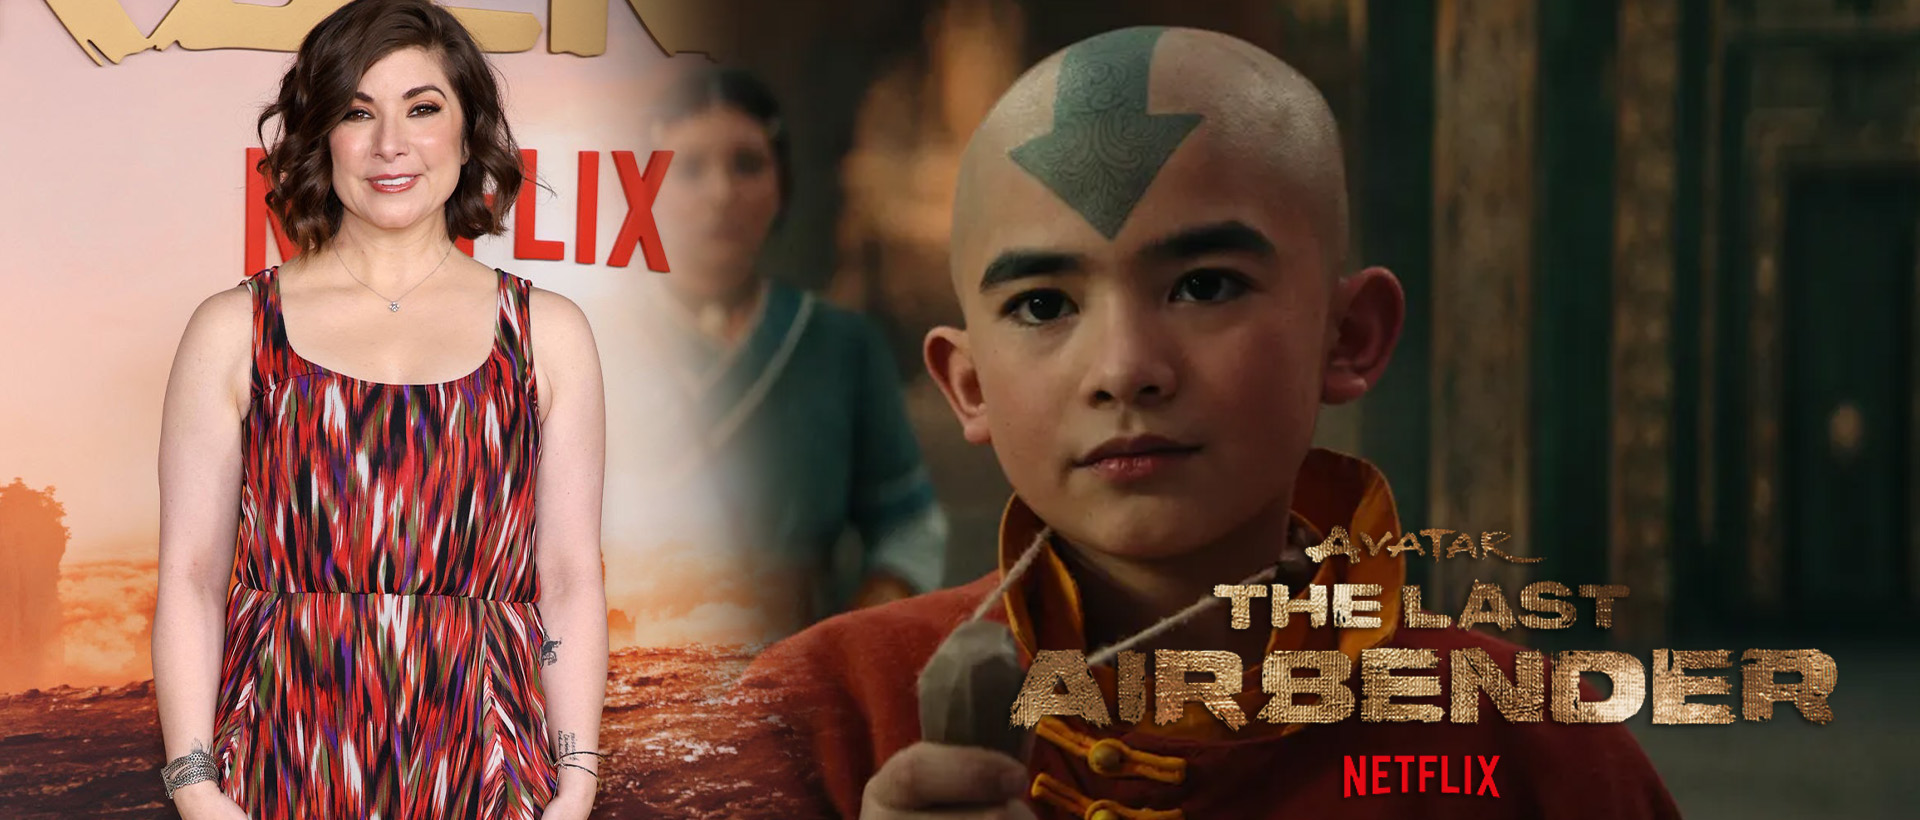 avatar the last airbender S2 writers room banner